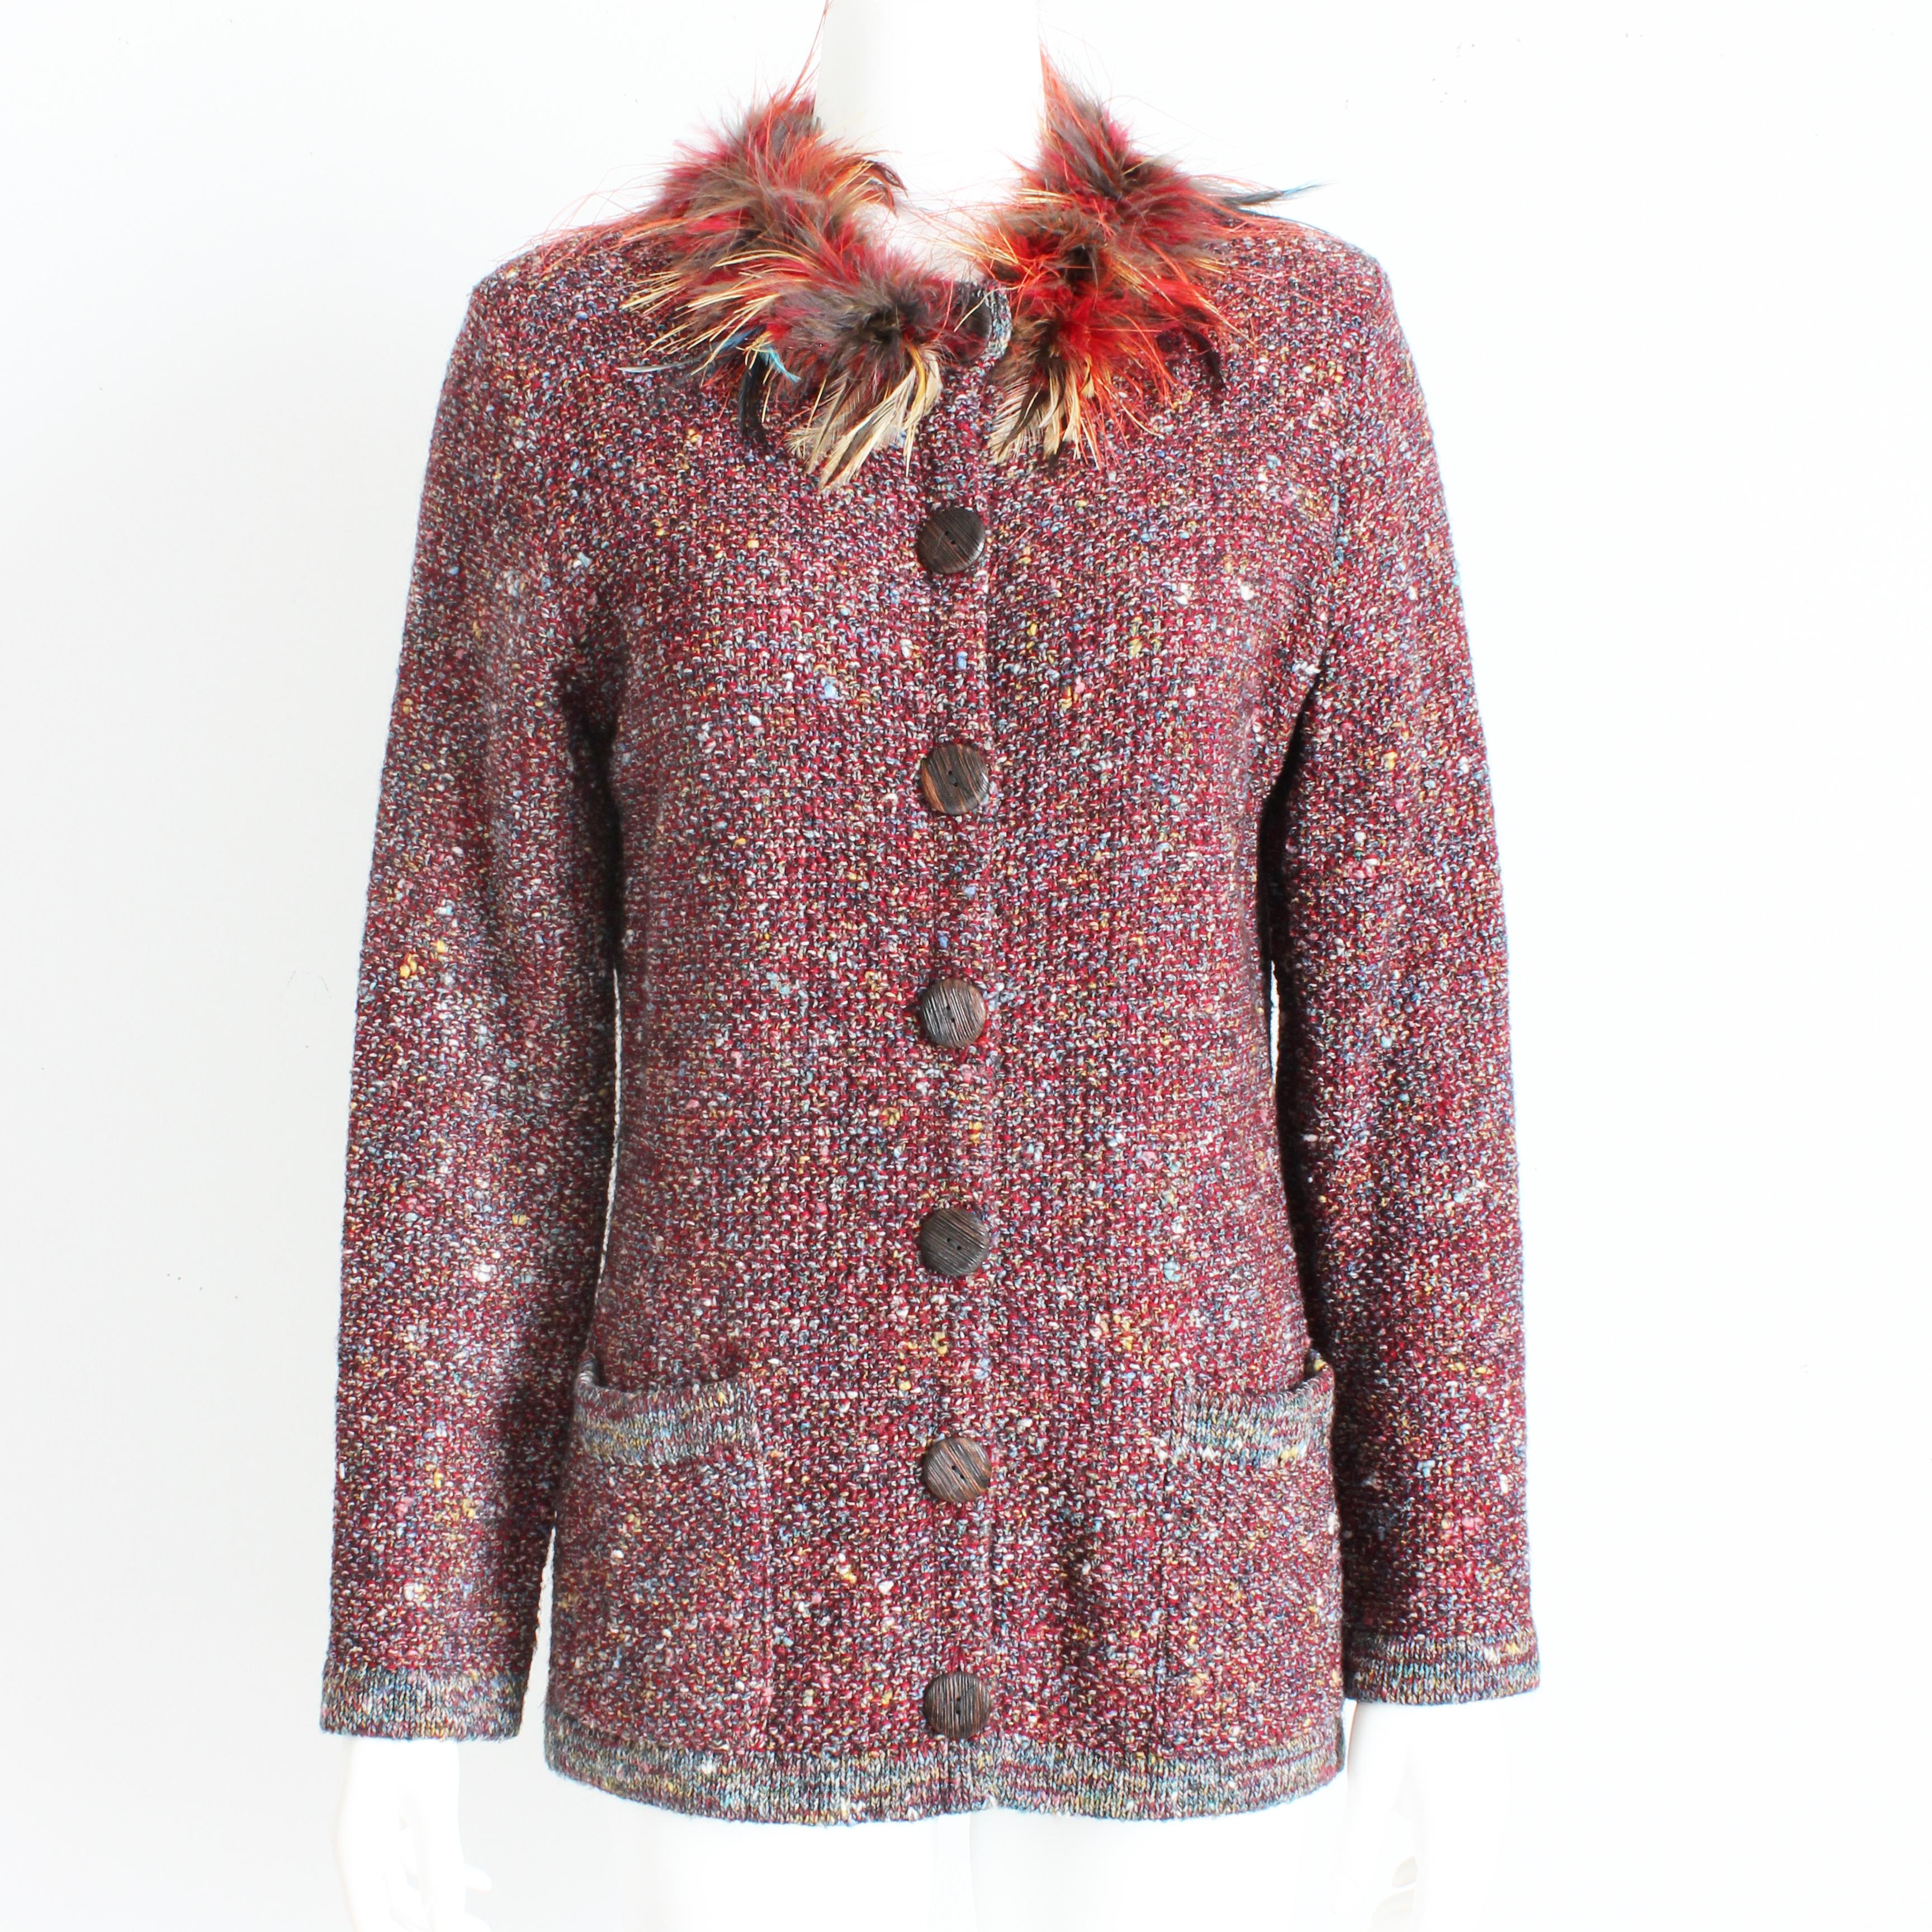 Impossible to find vintage 90s Yves Saint Laurent Rive Gauche multicolor knit cardigan jacket with Marabou feather collar, size 38.  As seen on the runway.  Made from alpaca wool blend knit, it fastens with wooden buttons and features contrasting